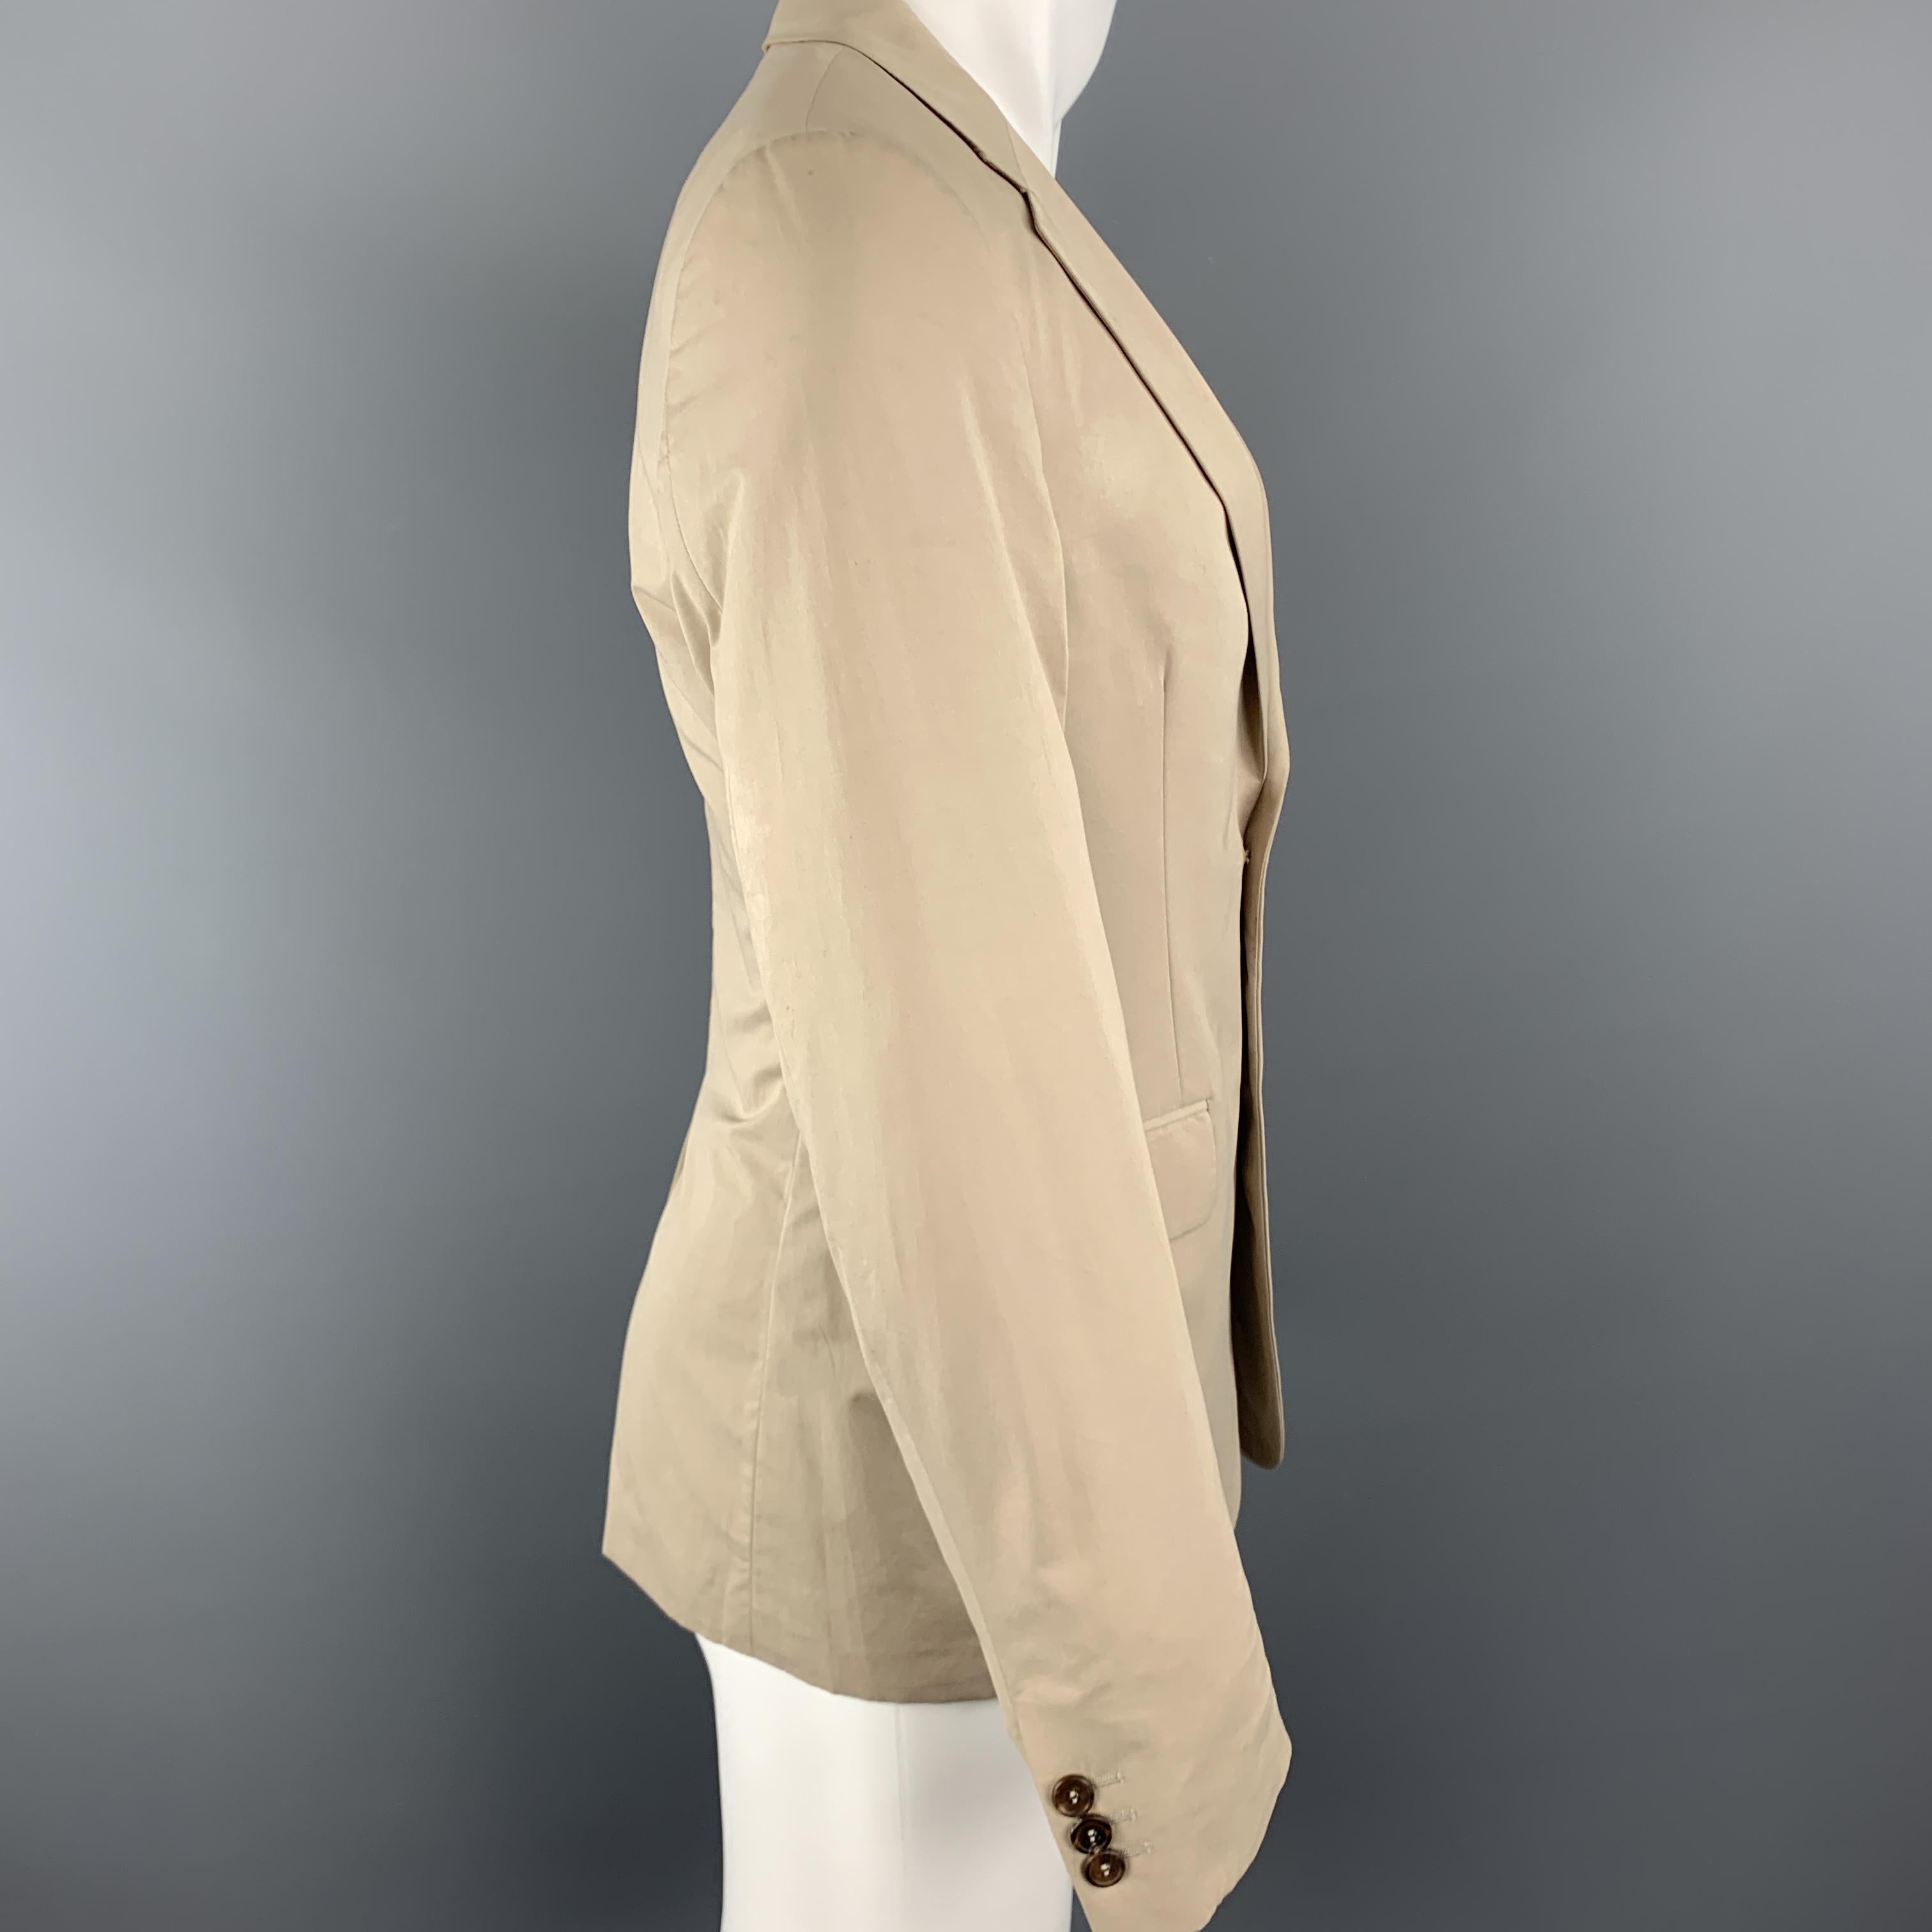 PRADA sport coat comes in khaki beige light weight cotton blend fabric with a notch lapel, single breasted,  two button front, and half liner. Stain on chest. As-is.

Fair Pre-Owned Condition.
Marked: IT 48

Measurements:

Shoulder: 16.5 in.
Chest: